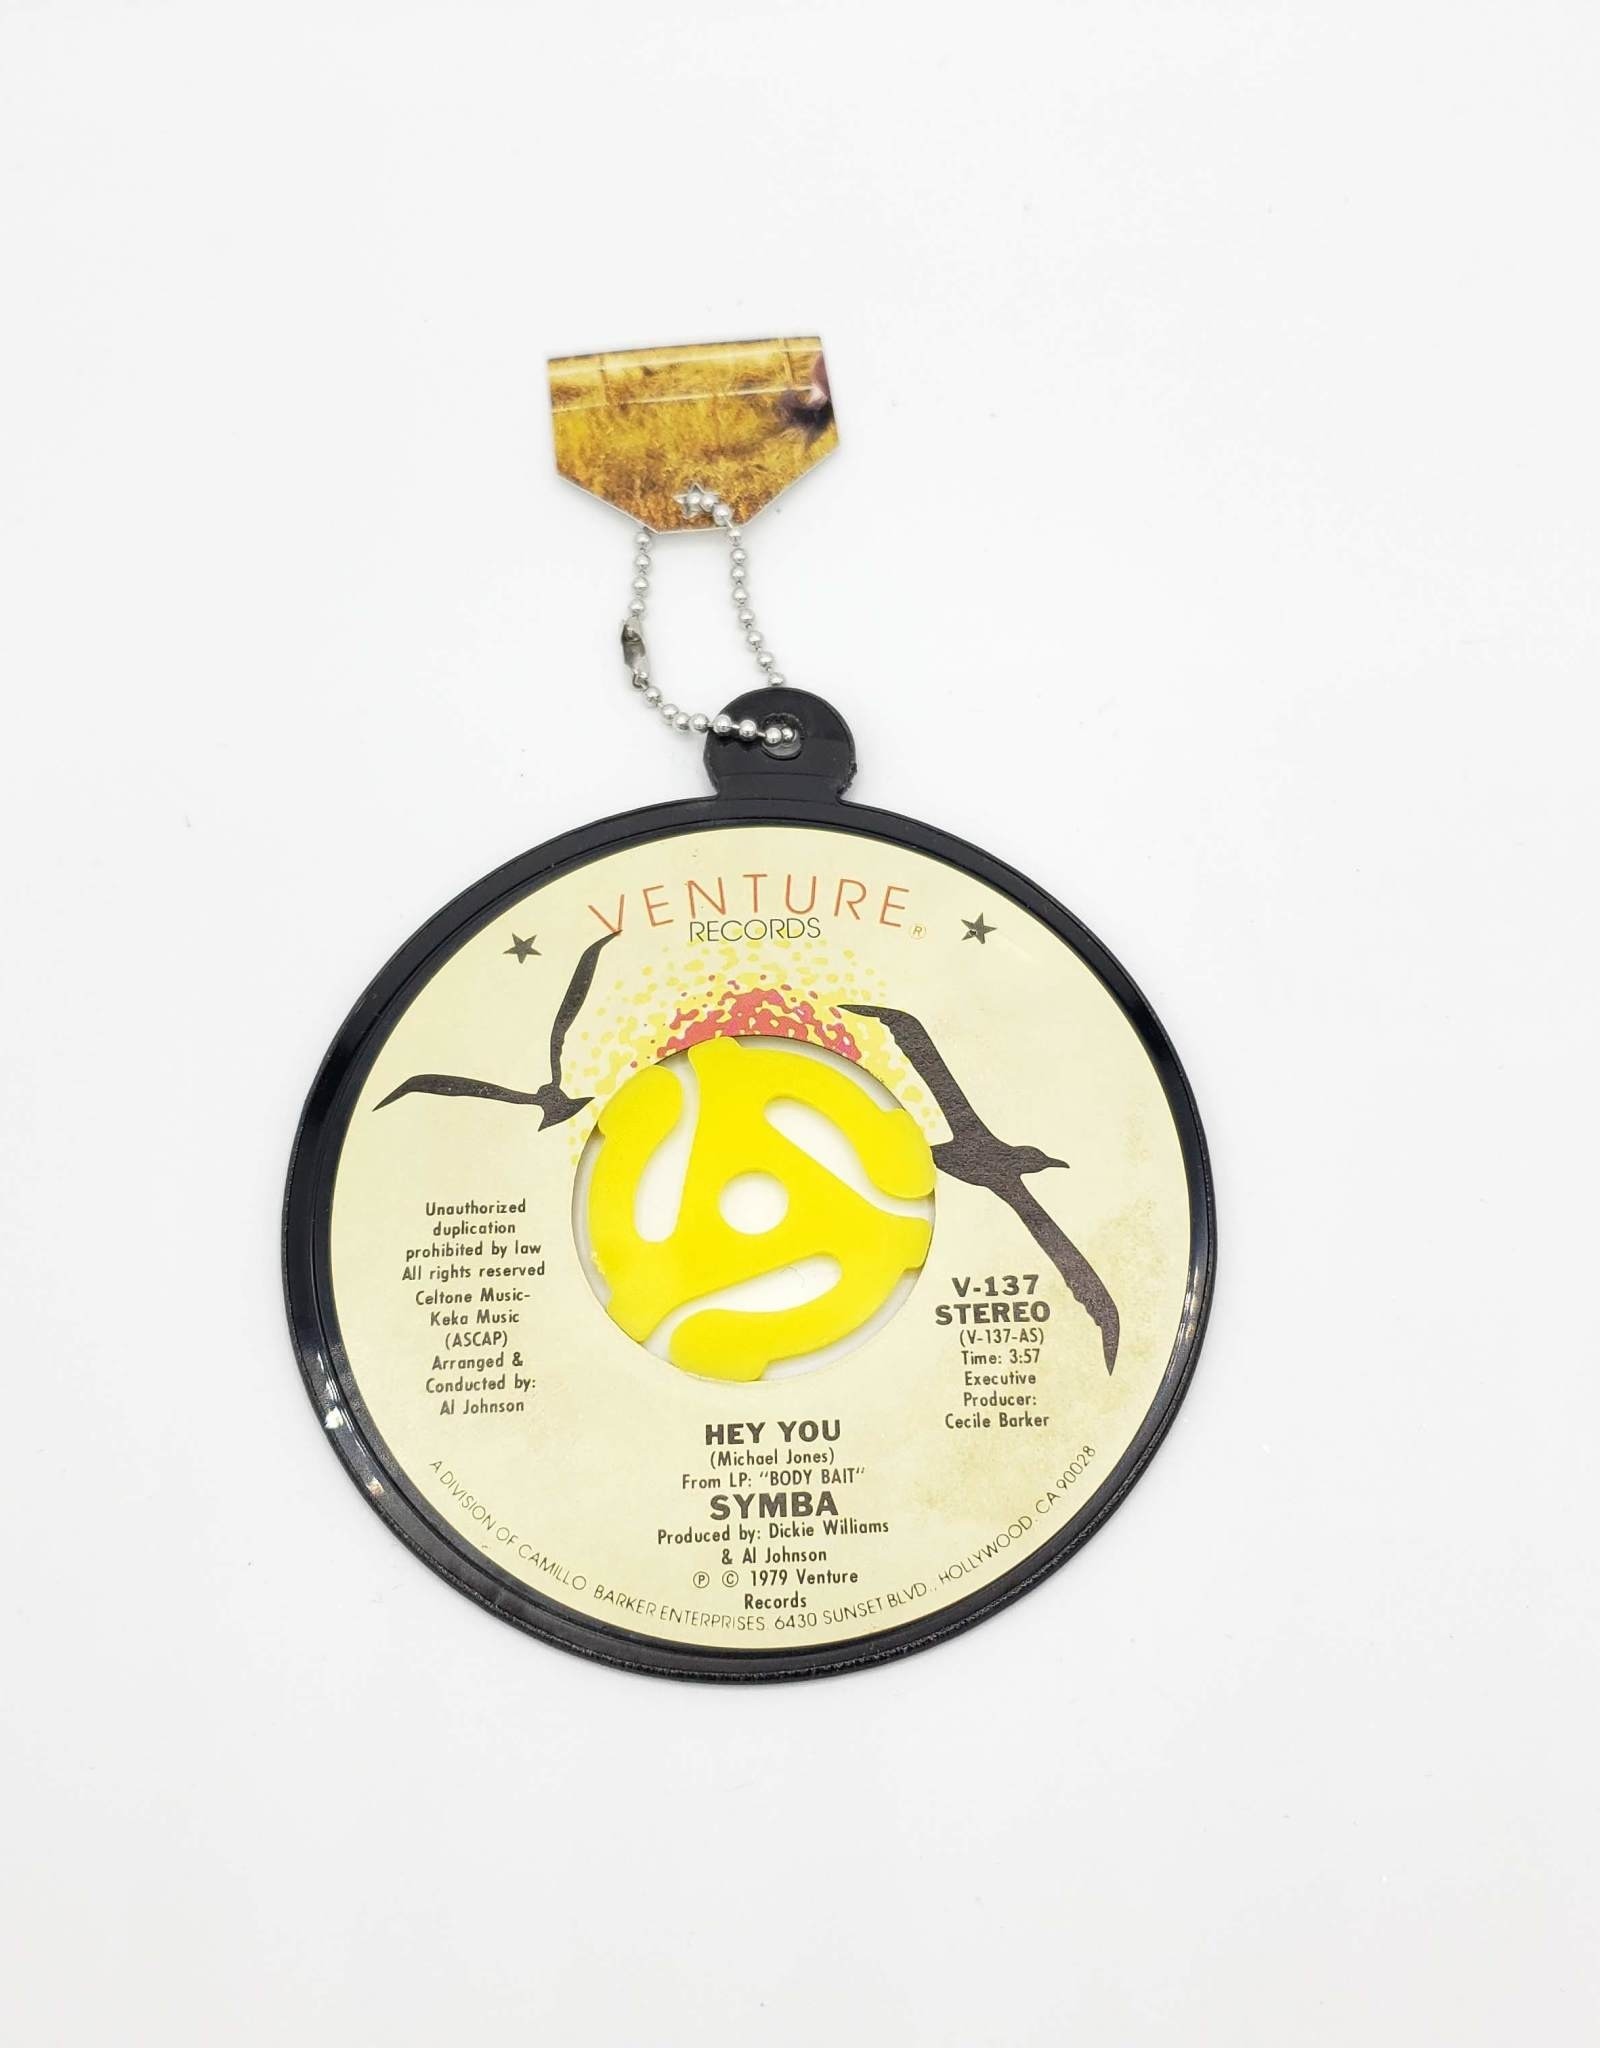 Vintage Recycled 45 RPM Record Ornament  Set of 3 - by Vinylux